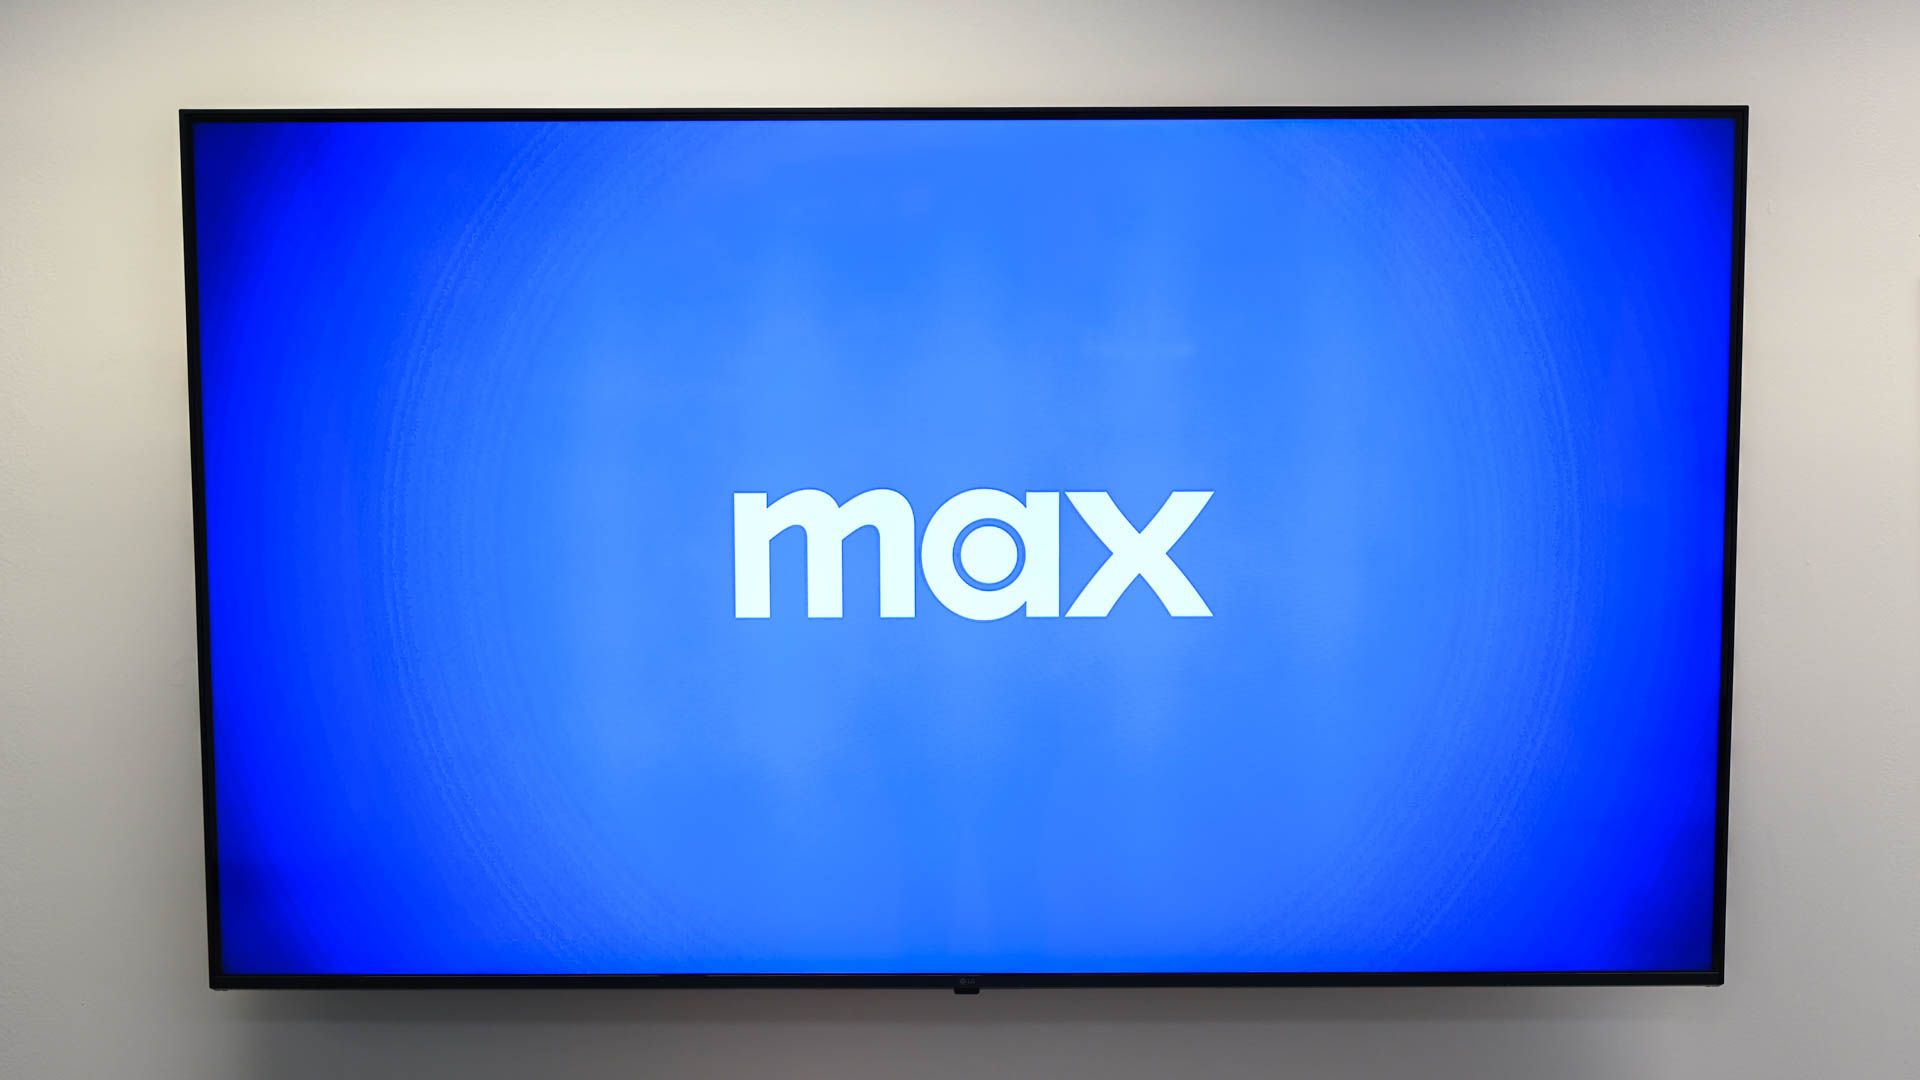 The Max app by HBO open on a smart tv